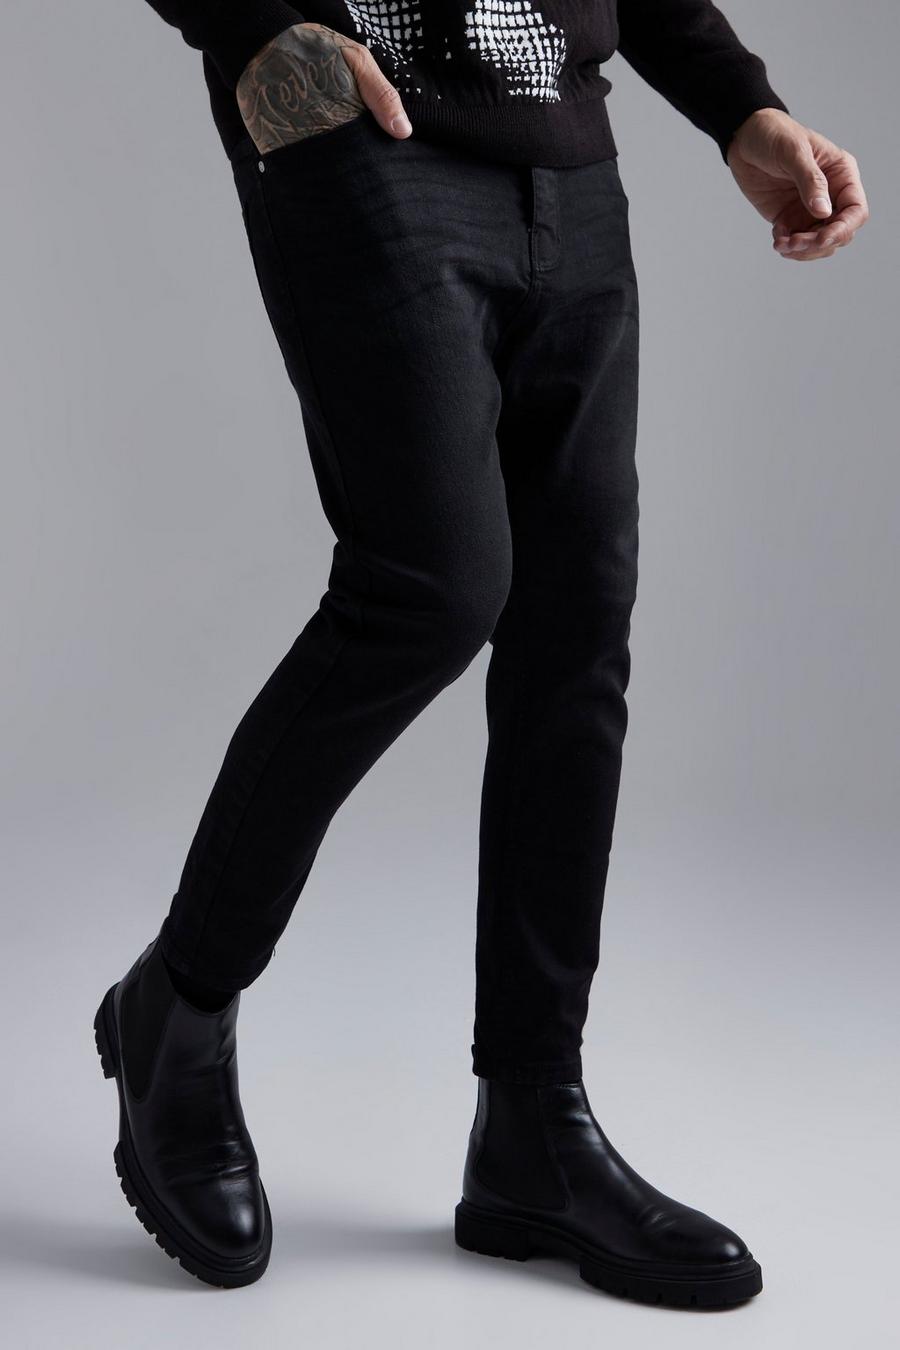 Charcoal grey Cropped Skinny Fit Jeans